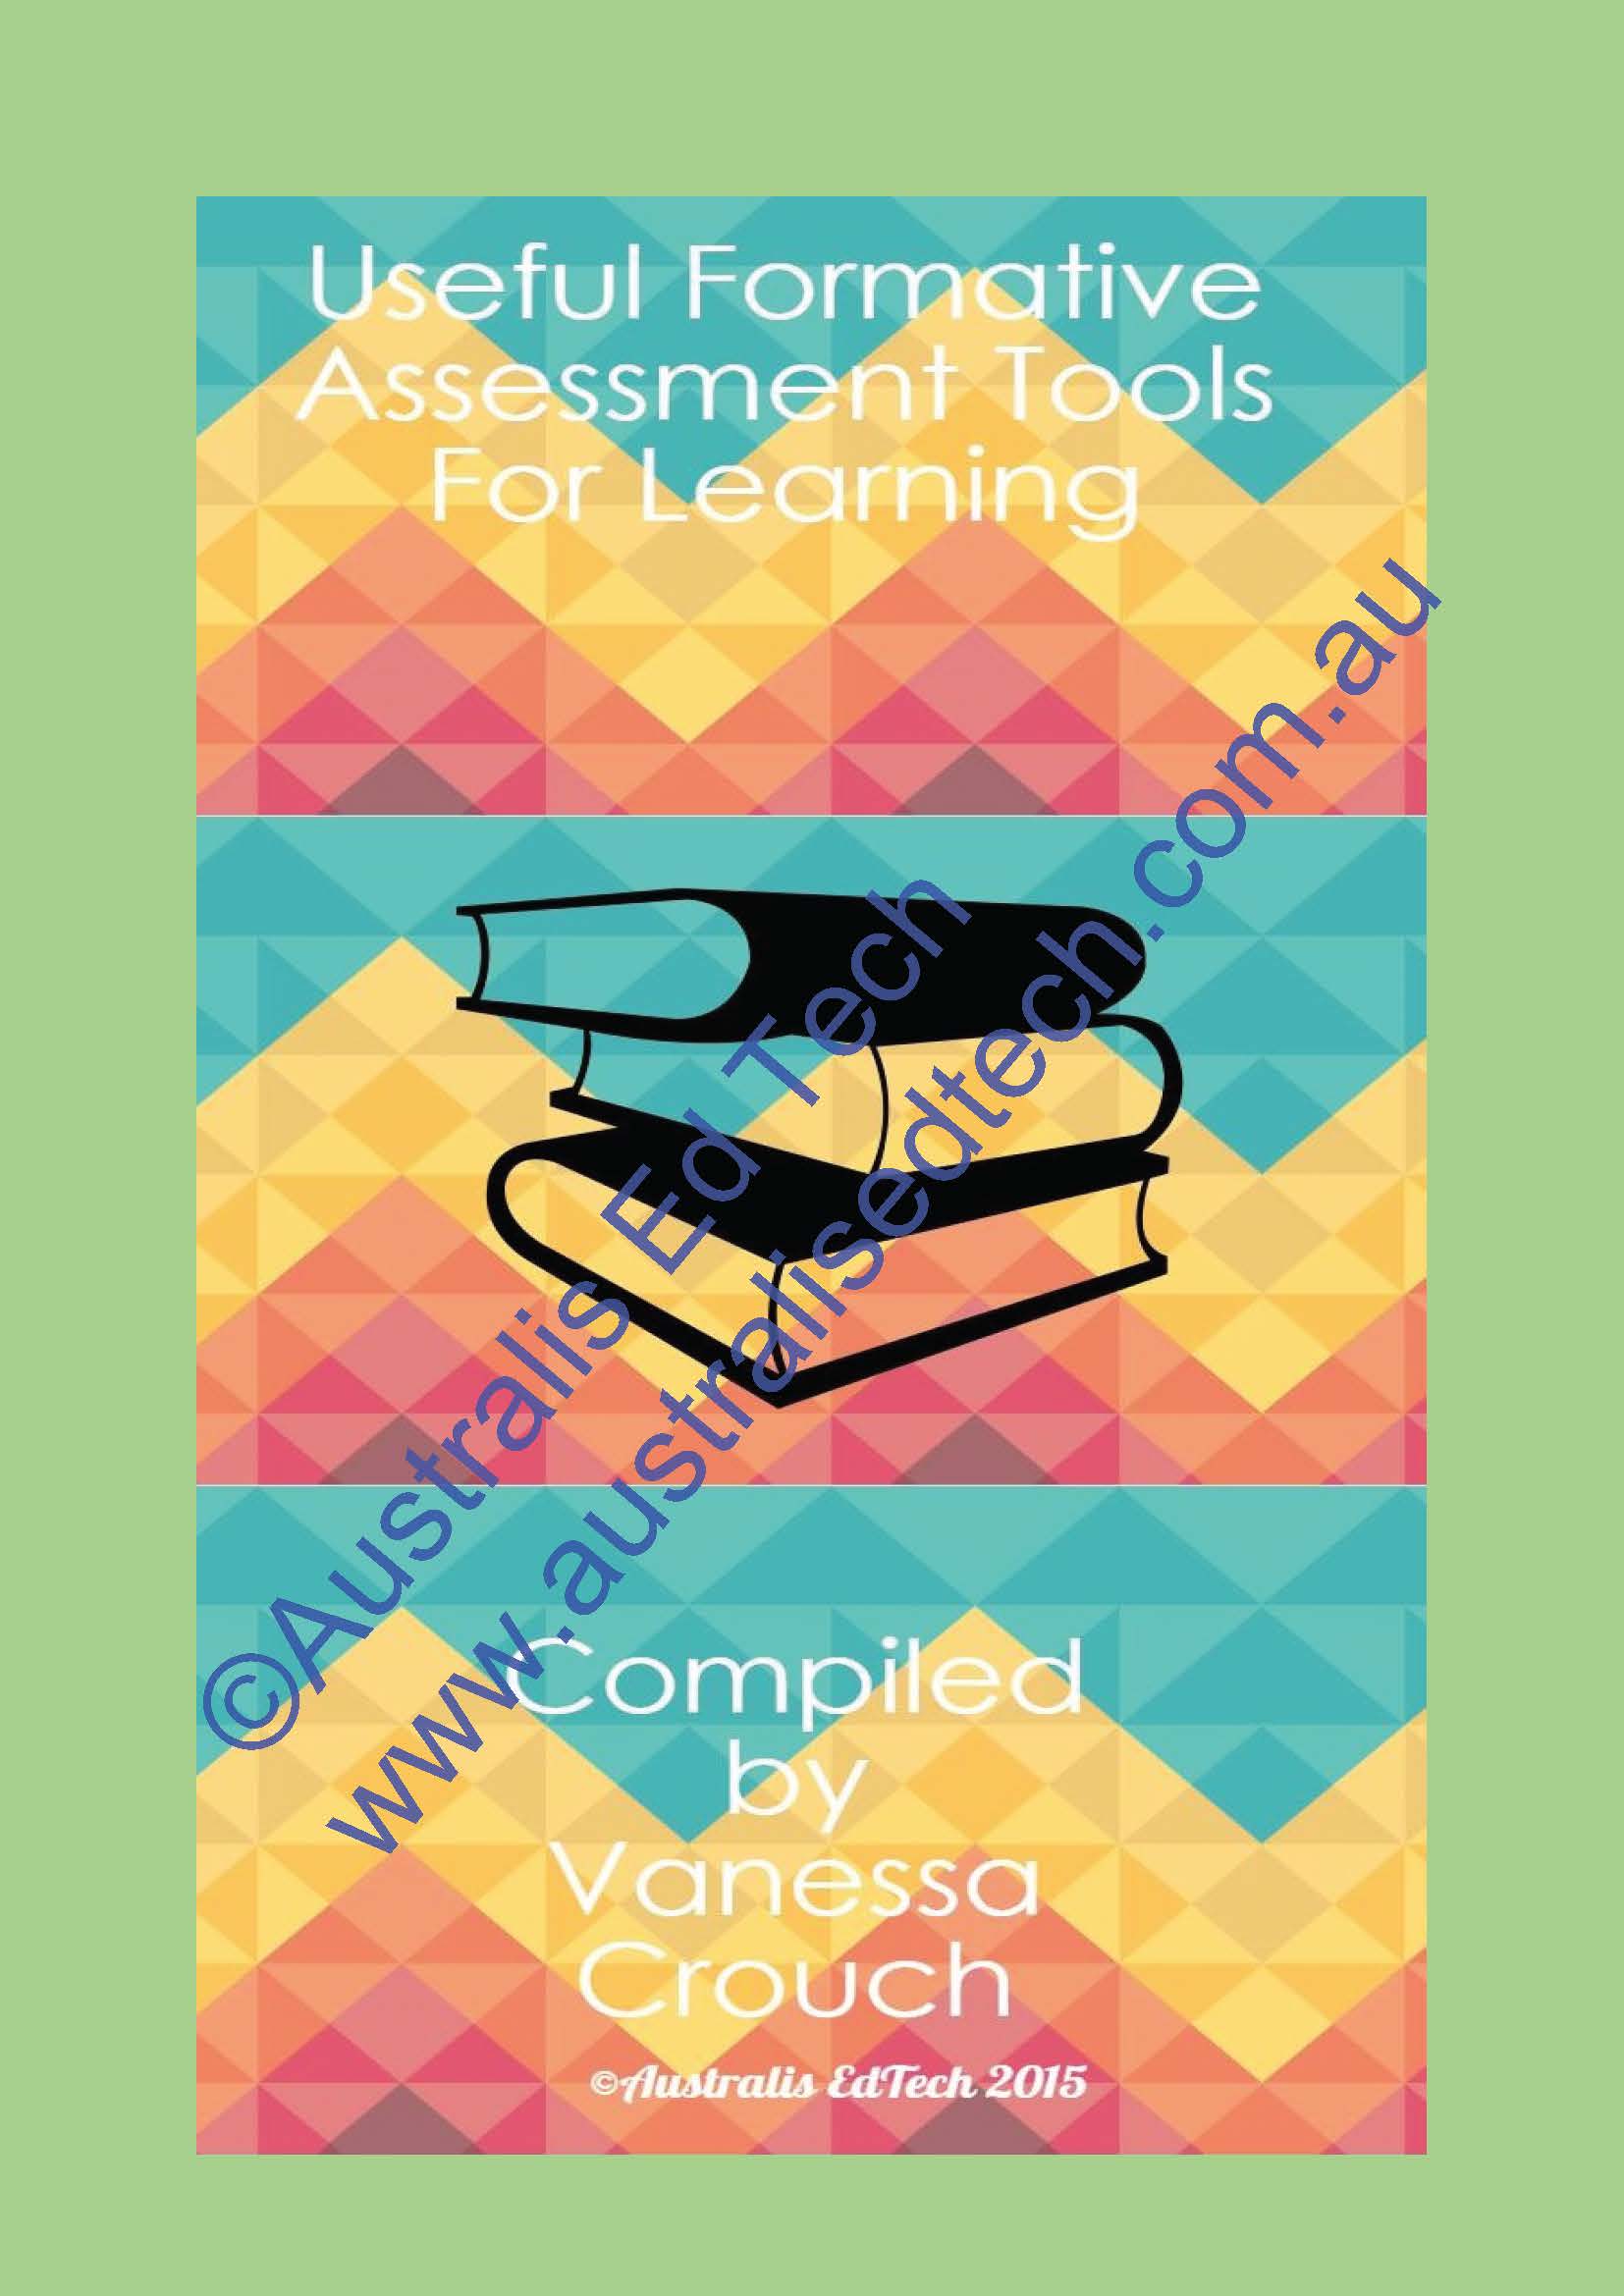 Useful Formative Assessment Tools for Learning